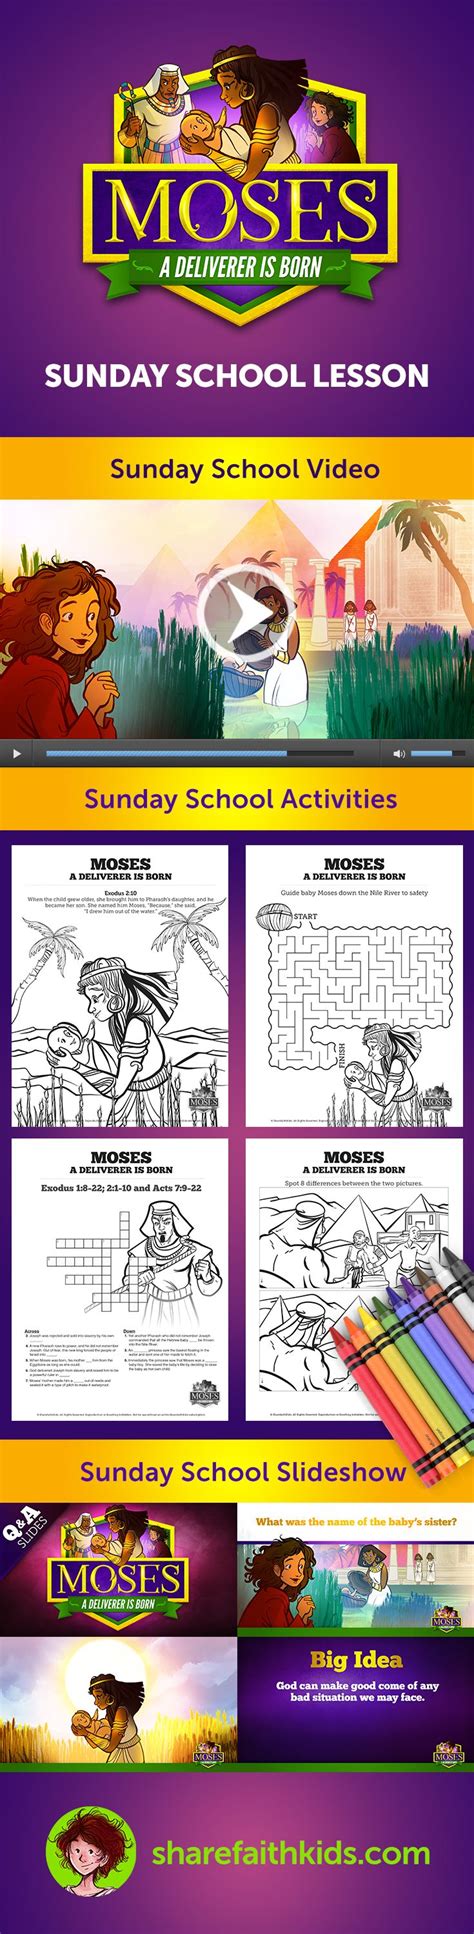 Pin On Top Spot The Difference Bible Activities For Kids